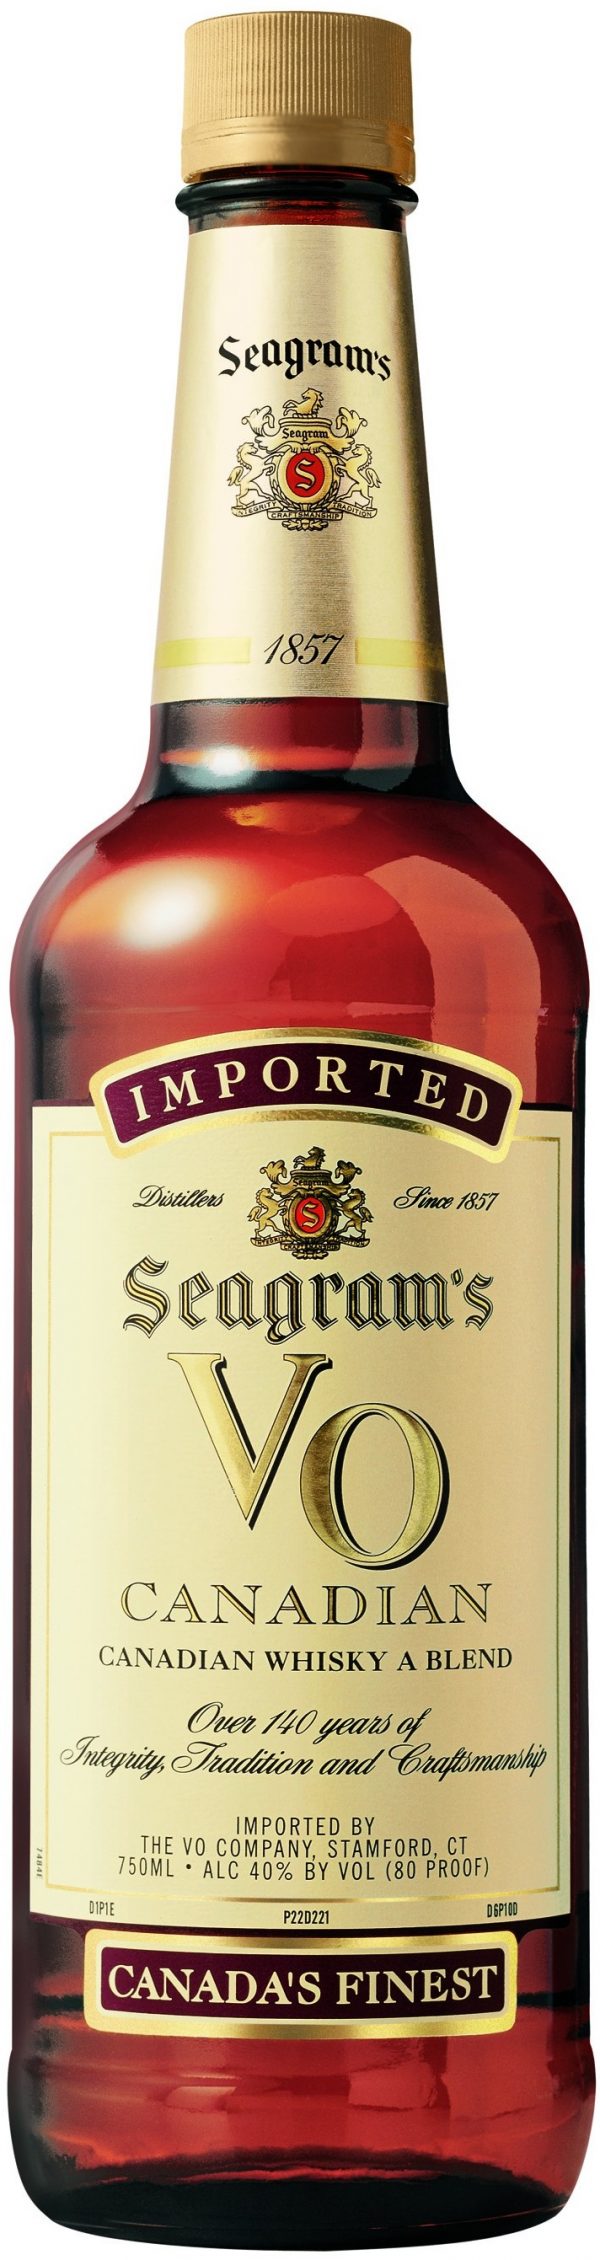 Zoom to enlarge the Seagram’s Vo Canadian Whisky